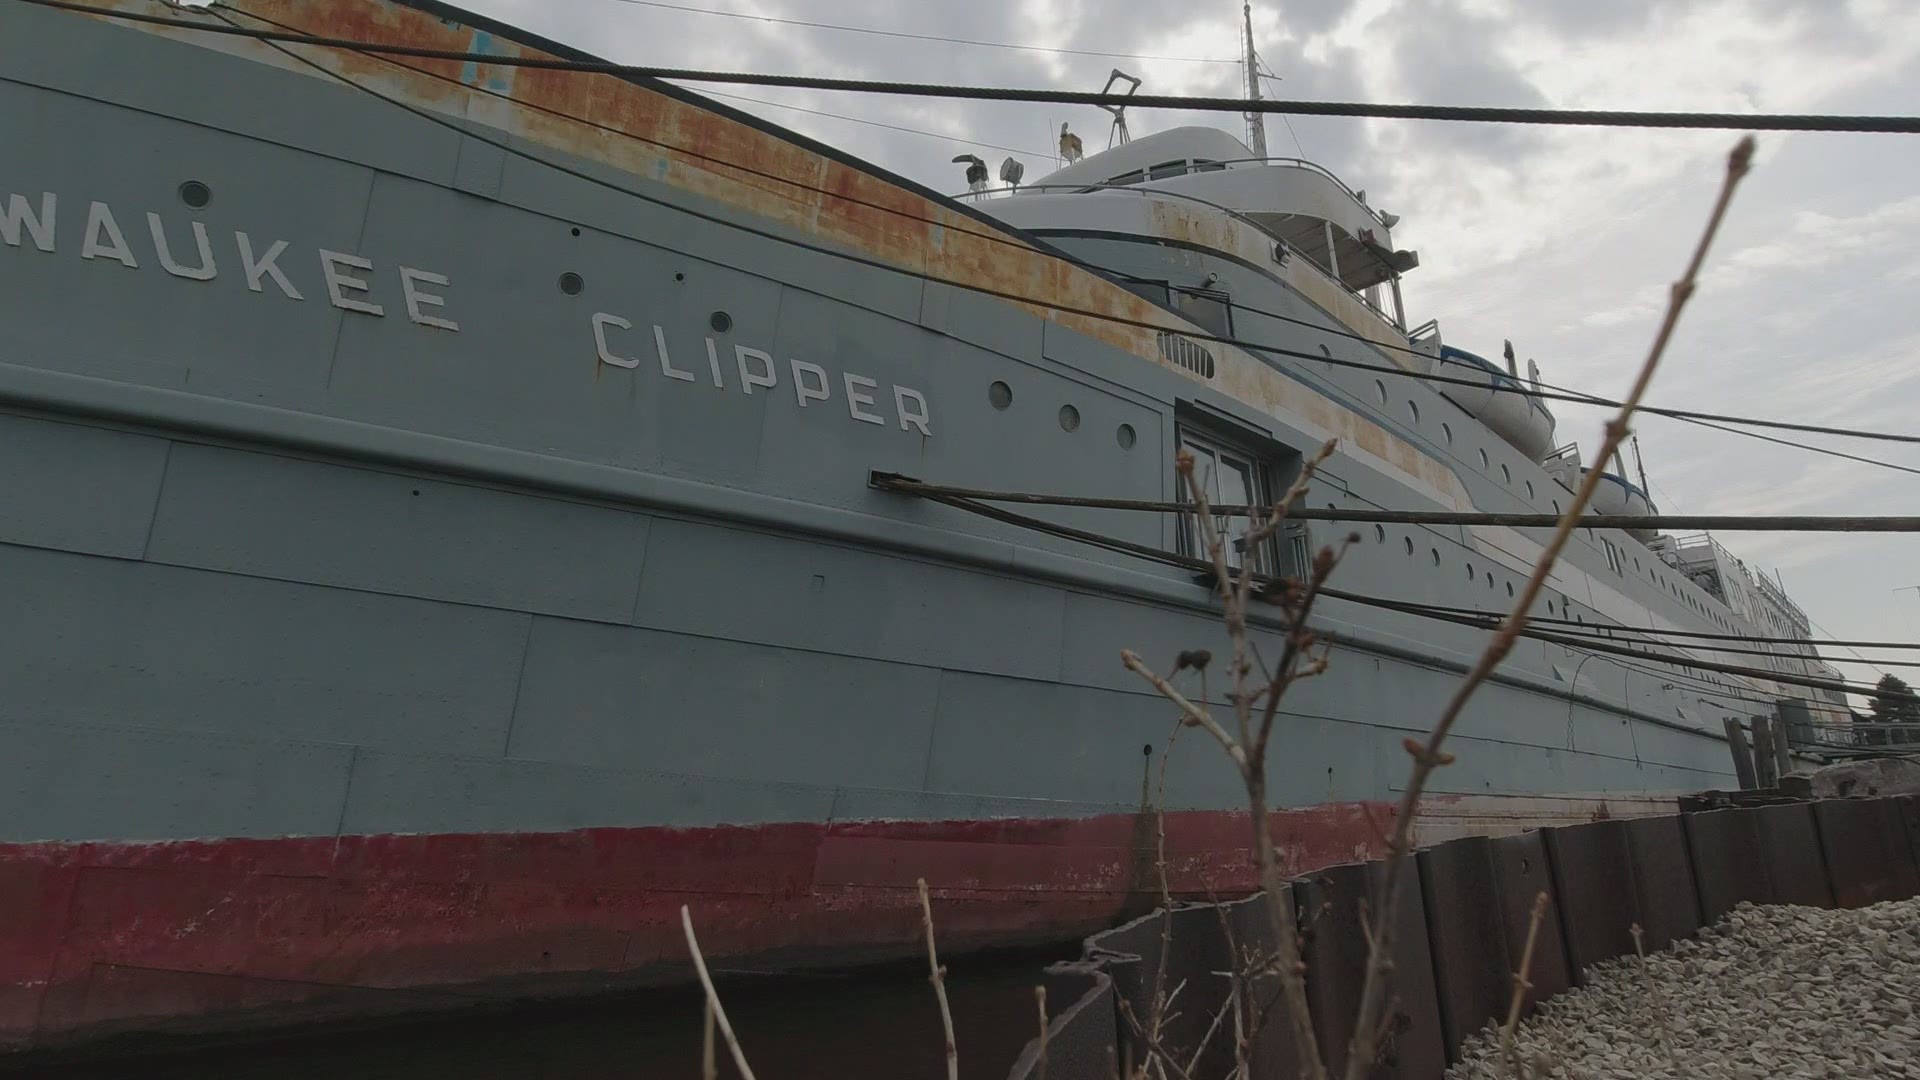 For 24 years, the Milwaukee Clipper ship has been docked on Muskegon Lake. A local group wants to breath life back into the 117-year-old ship, but that's up to YOU!